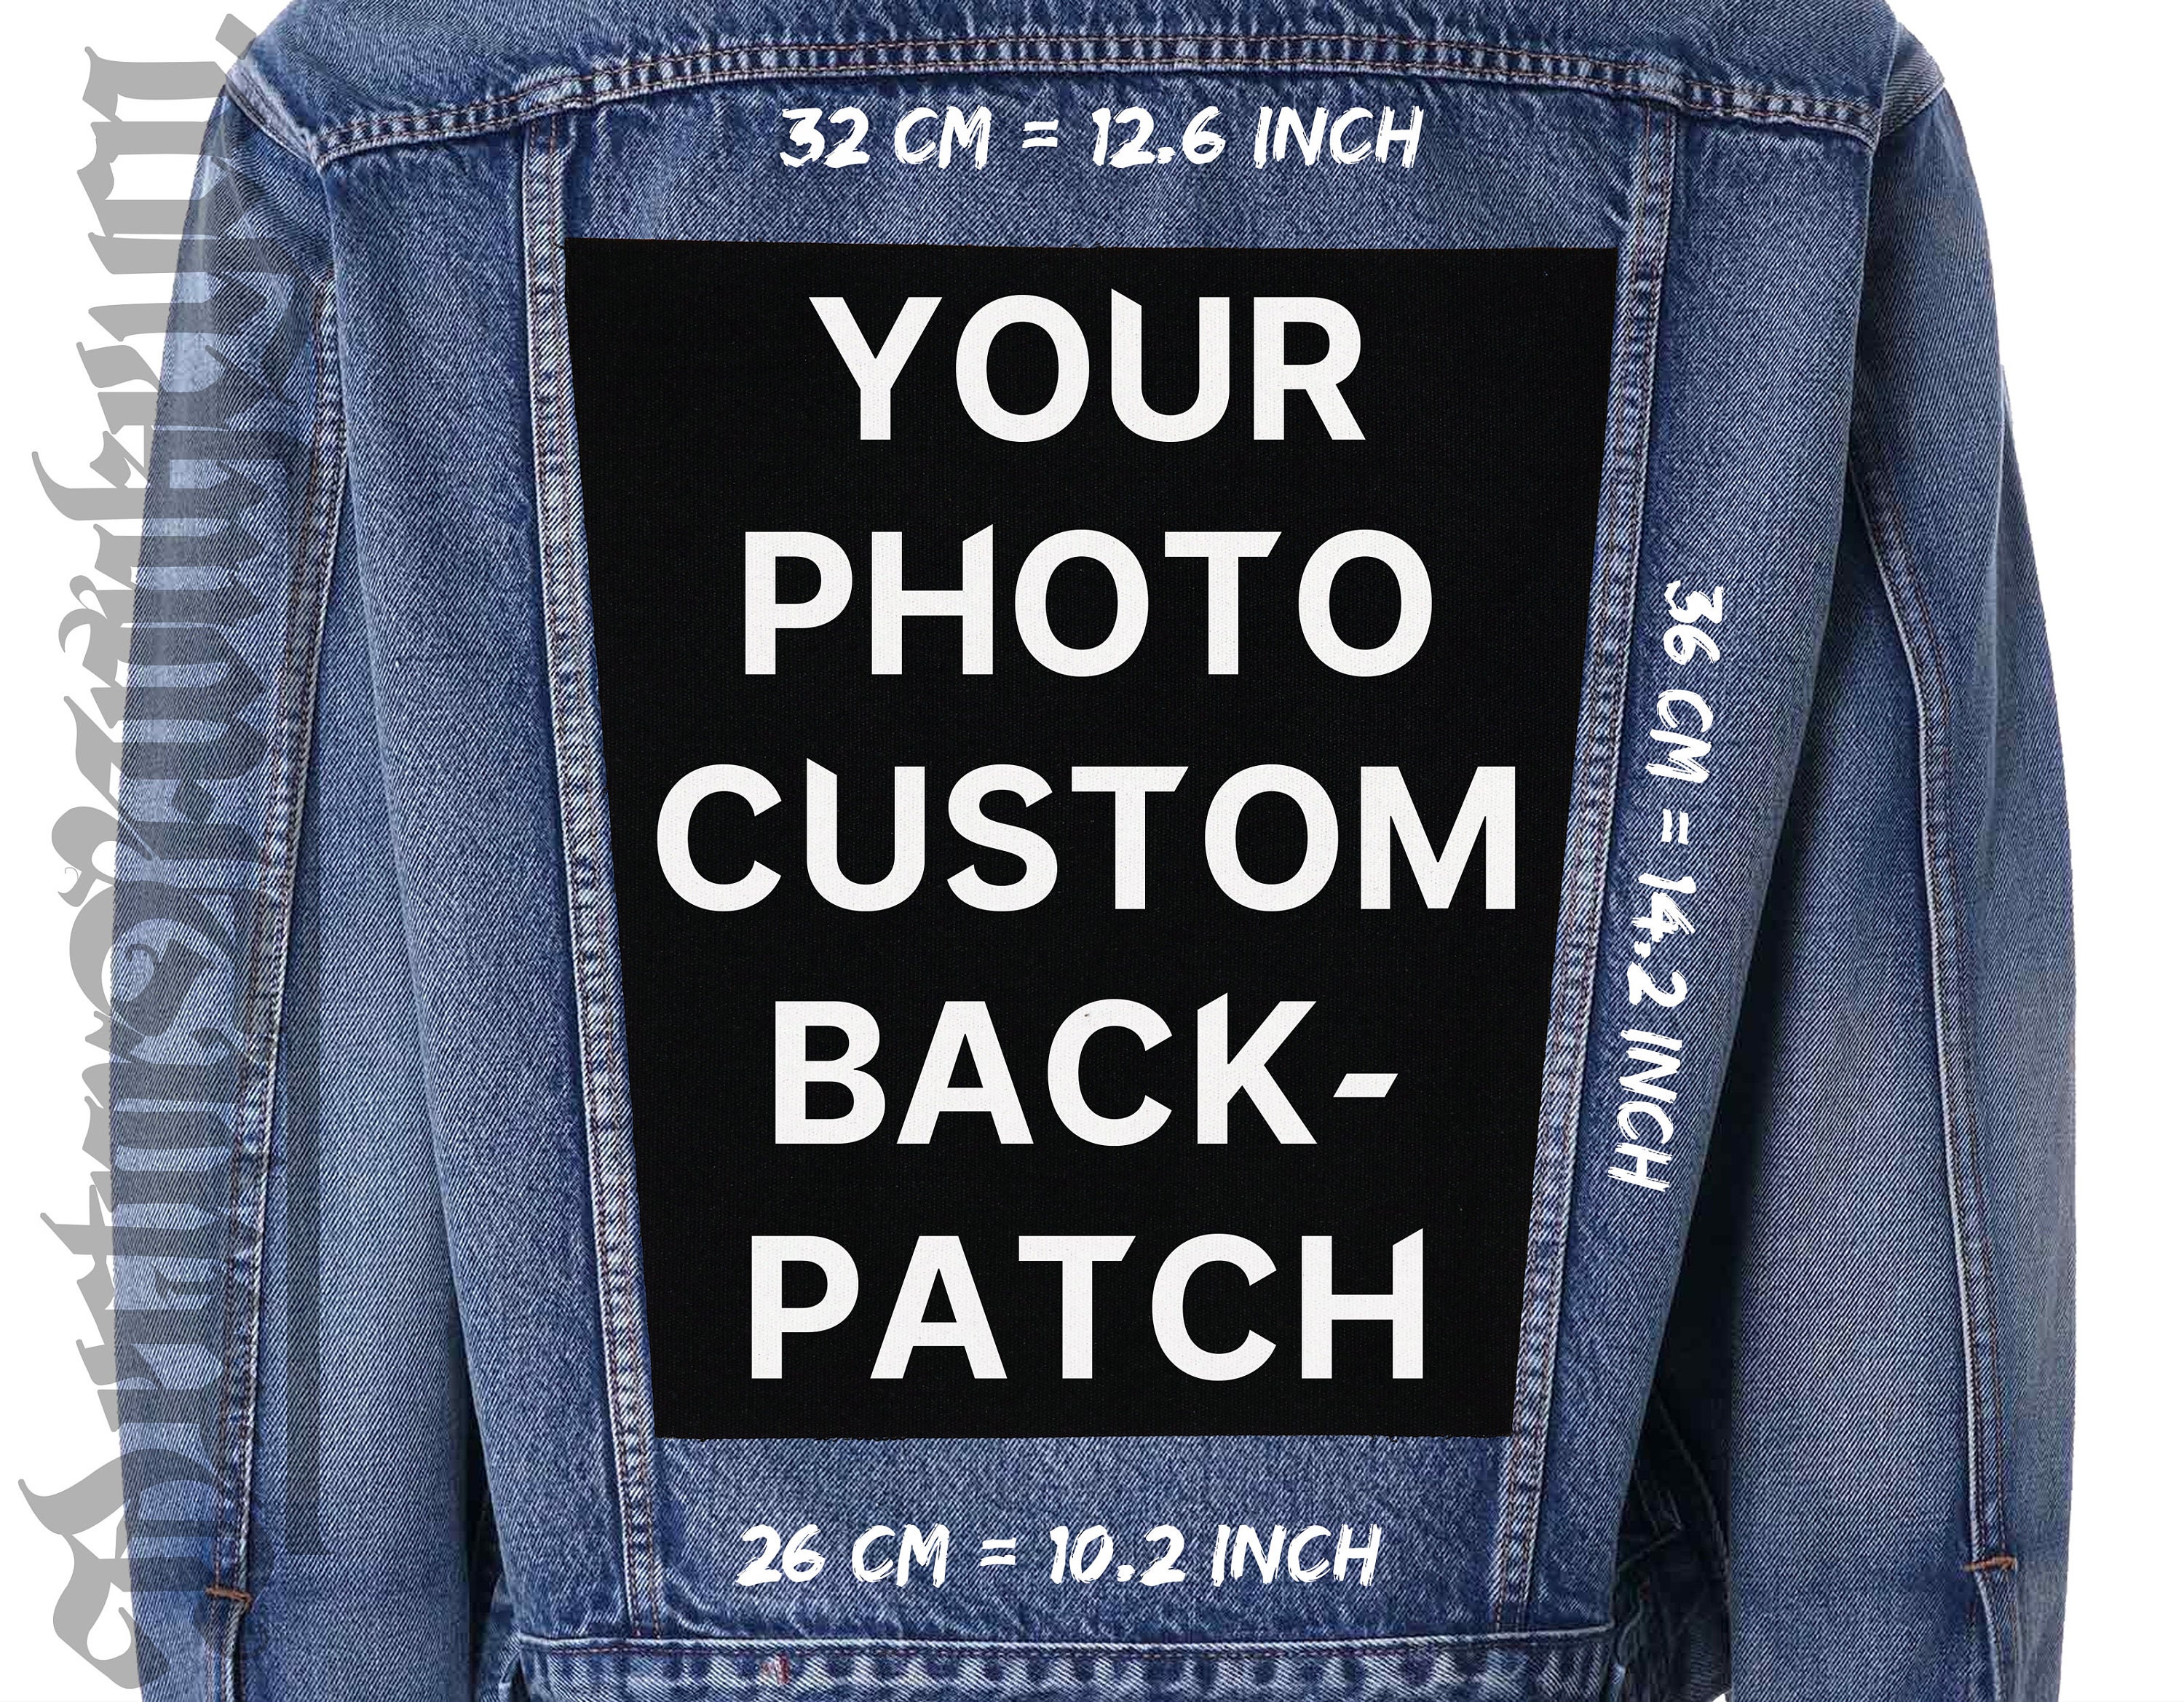 Fashionable custom back patches for jackets For Comfort And Style